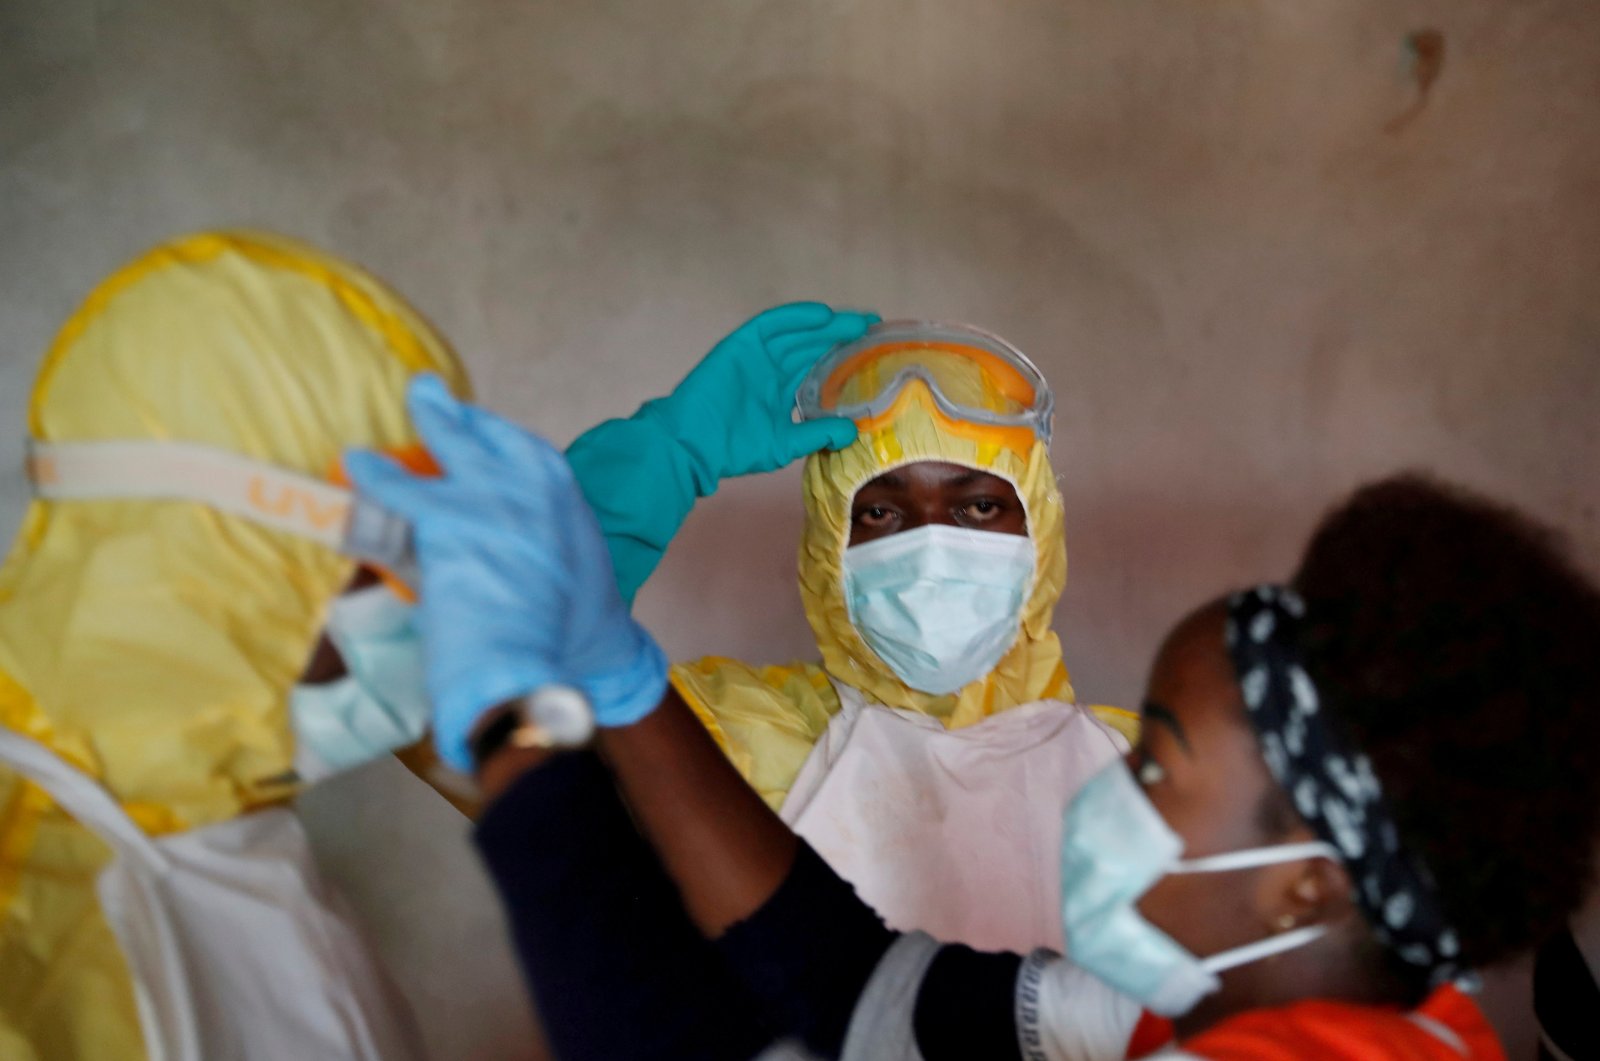 Health care workers adjust gear during a funeral of a person who is suspected of dying of Ebola in Beni, North Kivu Province, Democratic Republic of Congo, Dec. 9, 2018. (Reuters Photo)